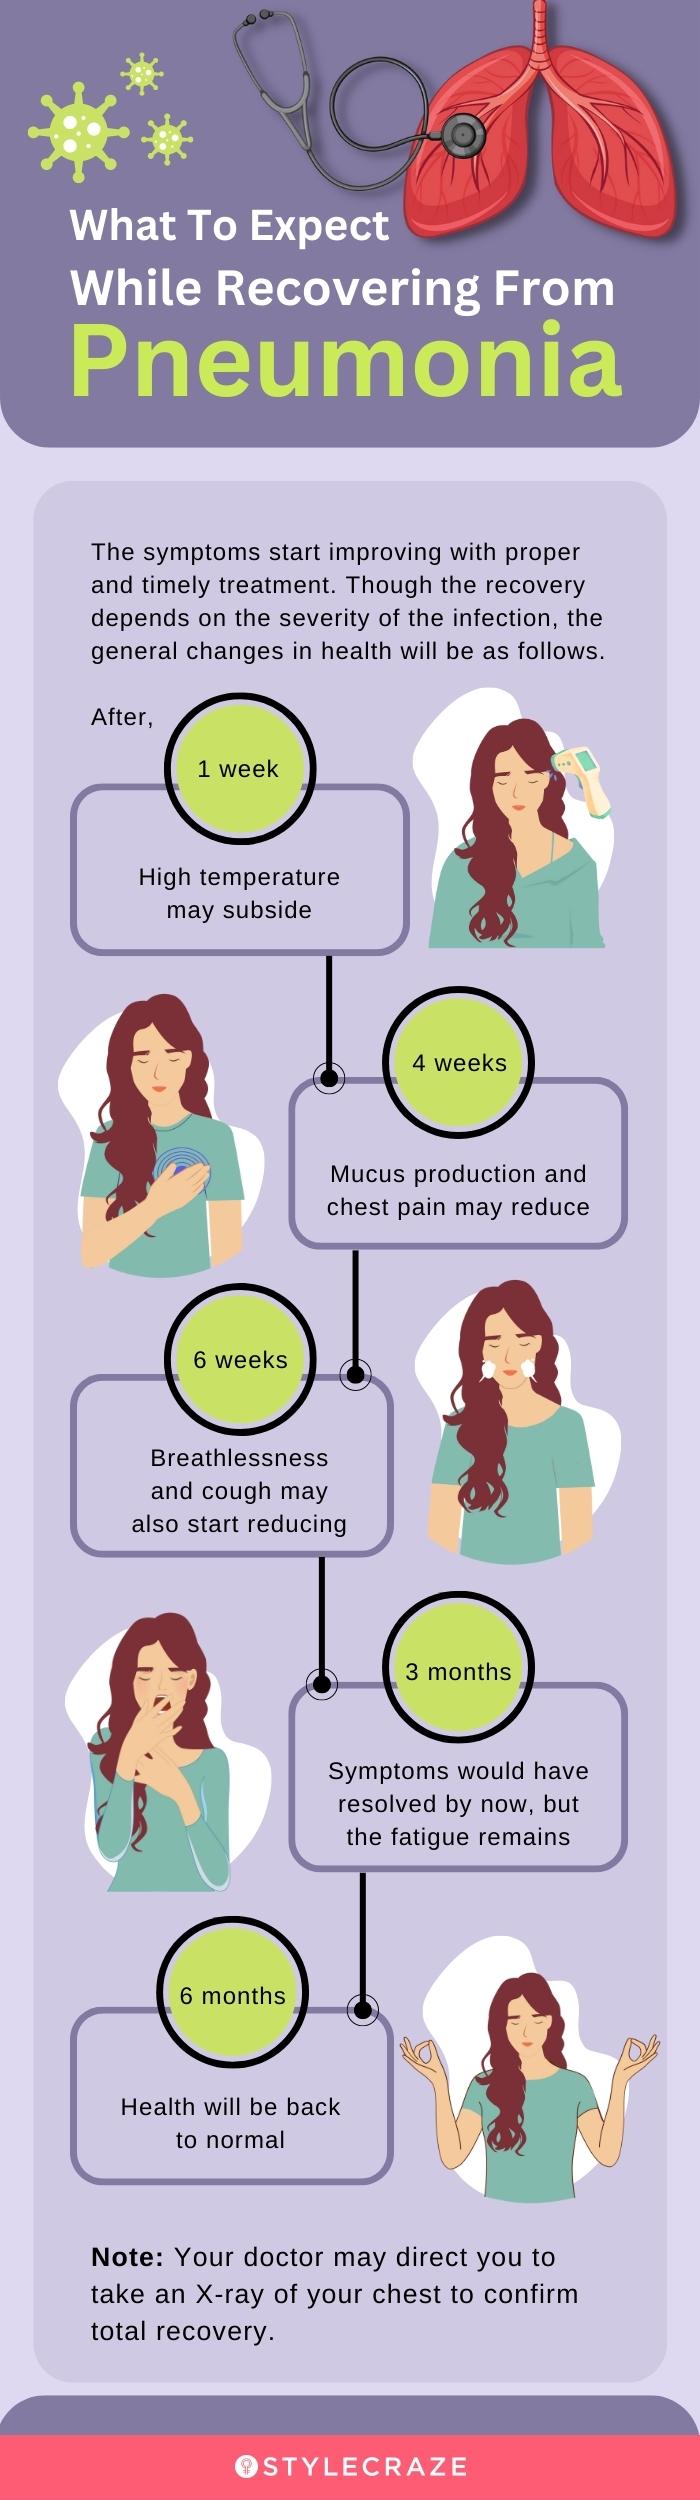 what to expect while recovering from pneumonia (infographic)